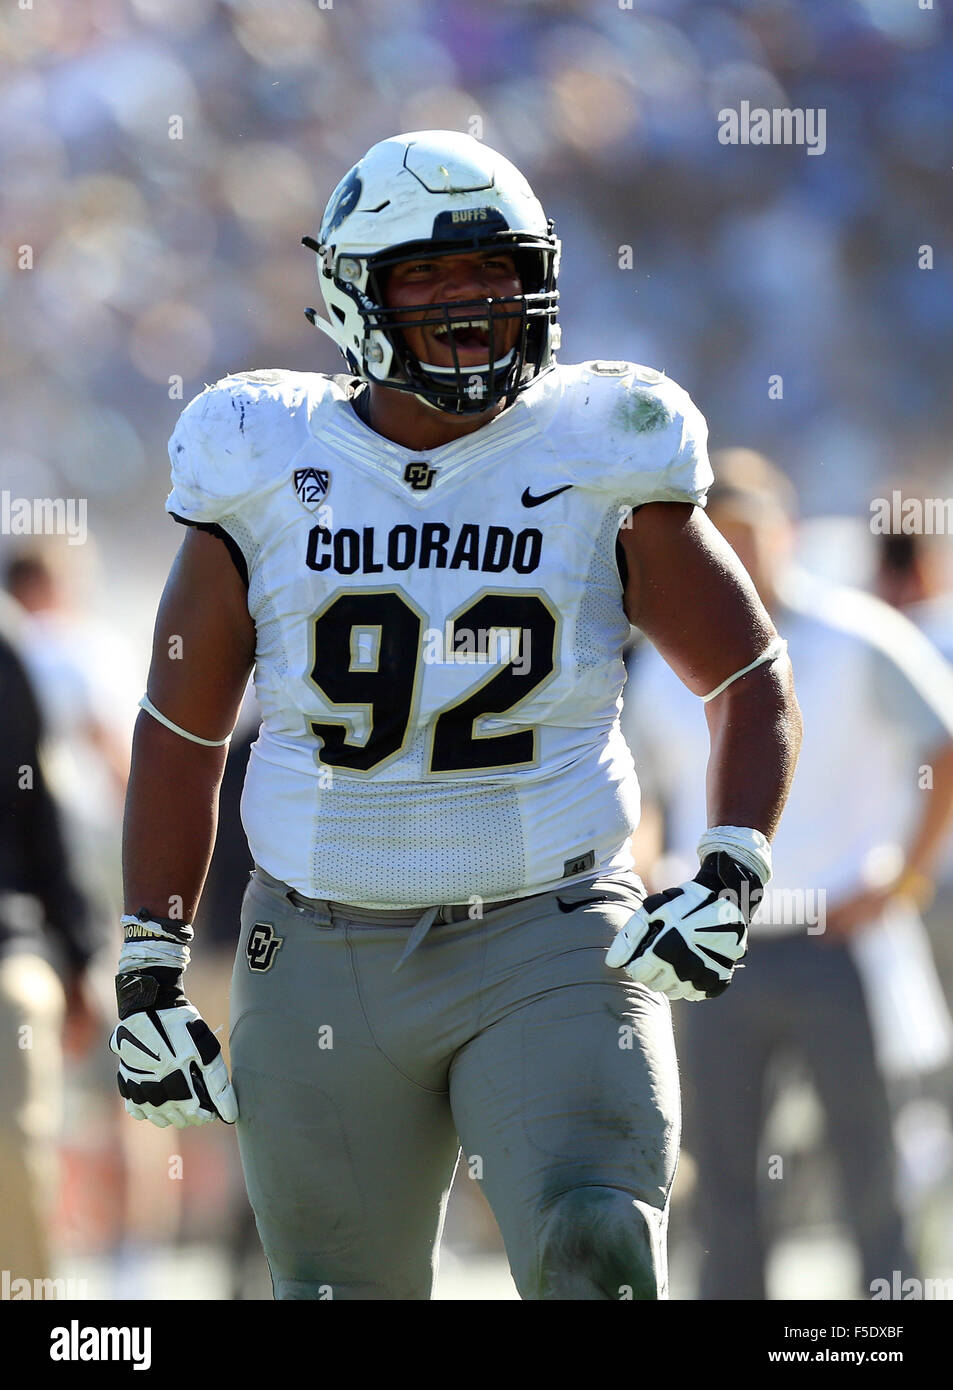 October 31, Colorado Buffaloes defensive lineman Jordan Carrell #92 in action during the college football game between UCLA Bruins and the Colorado Buffaloes at the Rose Bowl in Pasadena, California.Charles